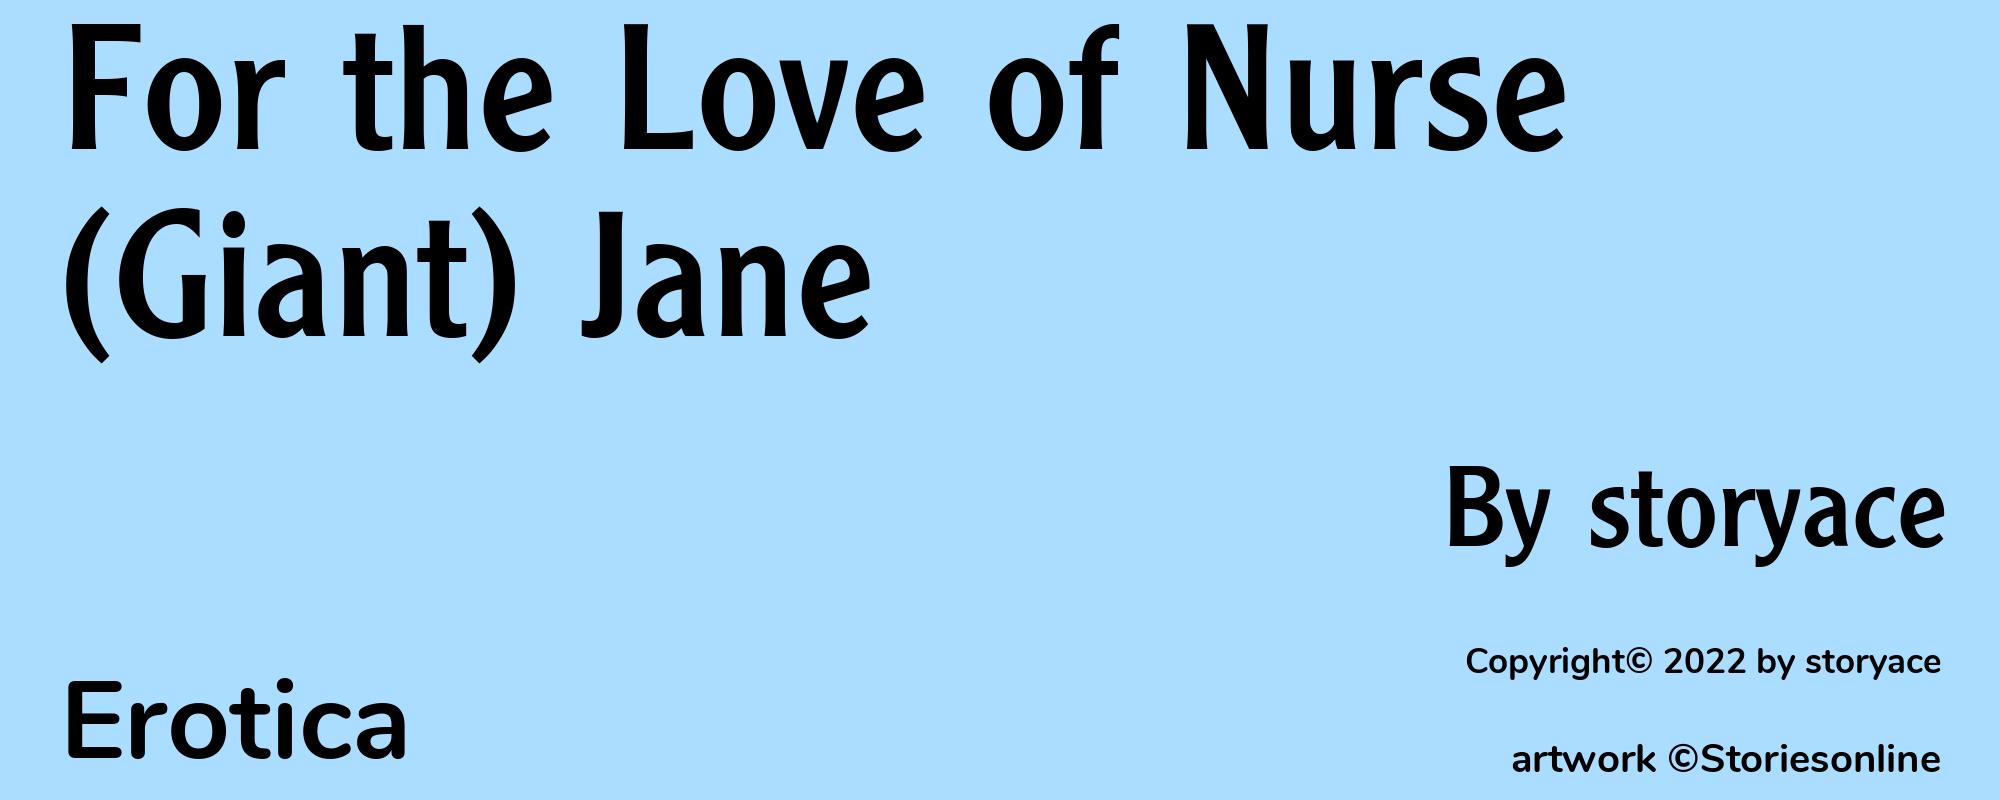 For the Love of Nurse (Giant) Jane - Cover